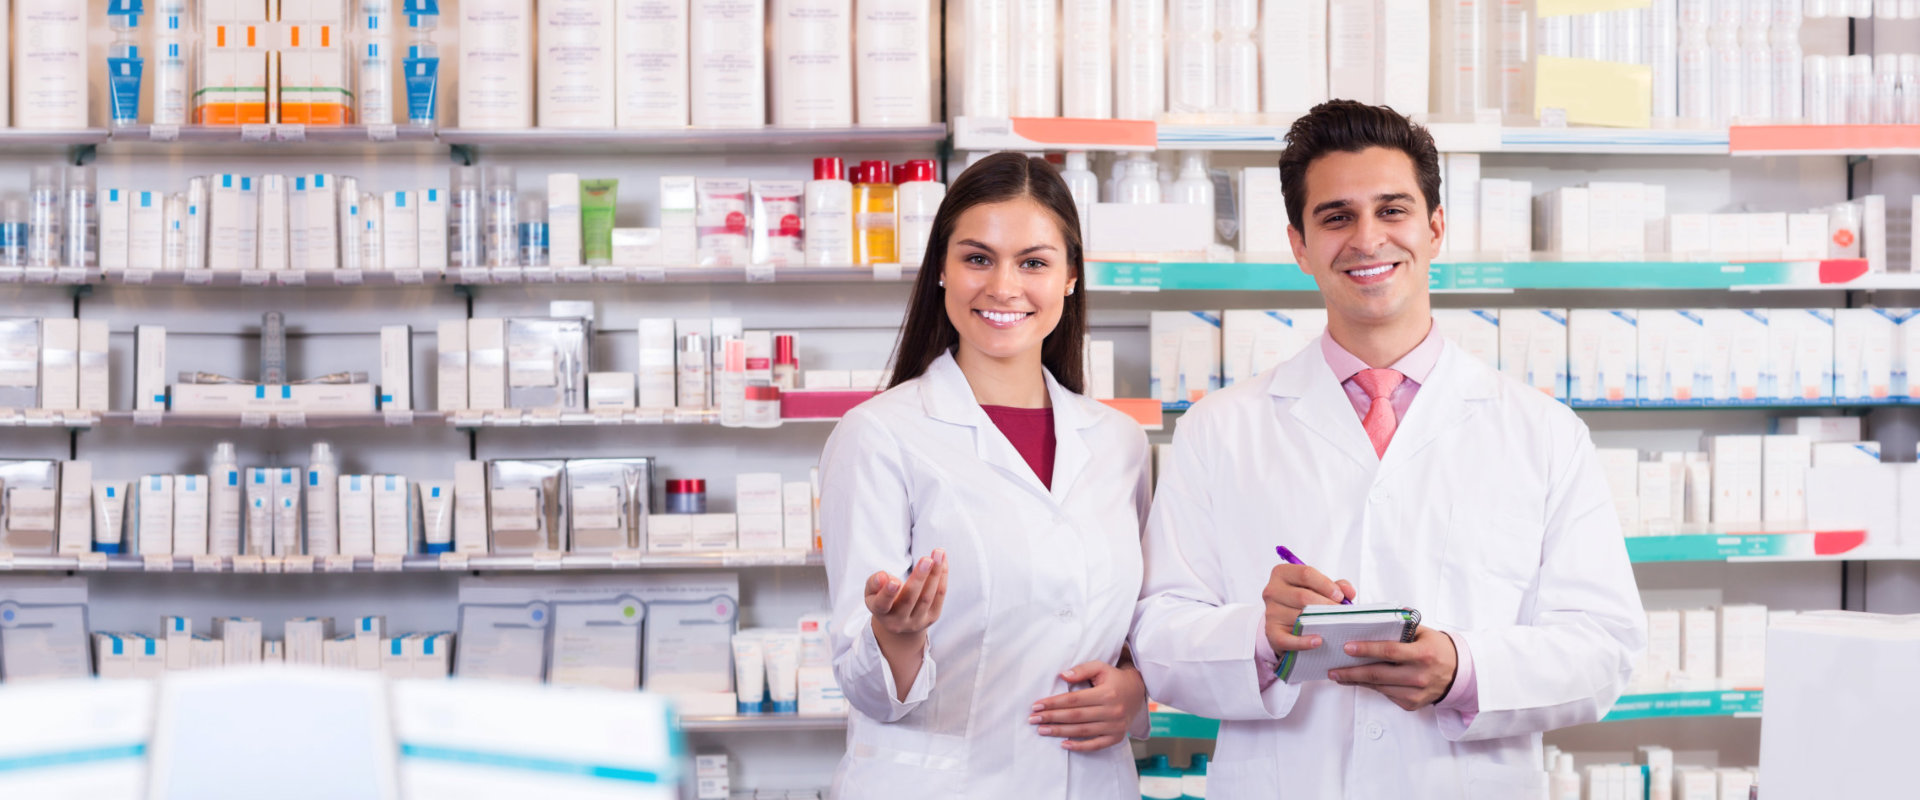 Smiling pharmacist and techician at the pharmacy